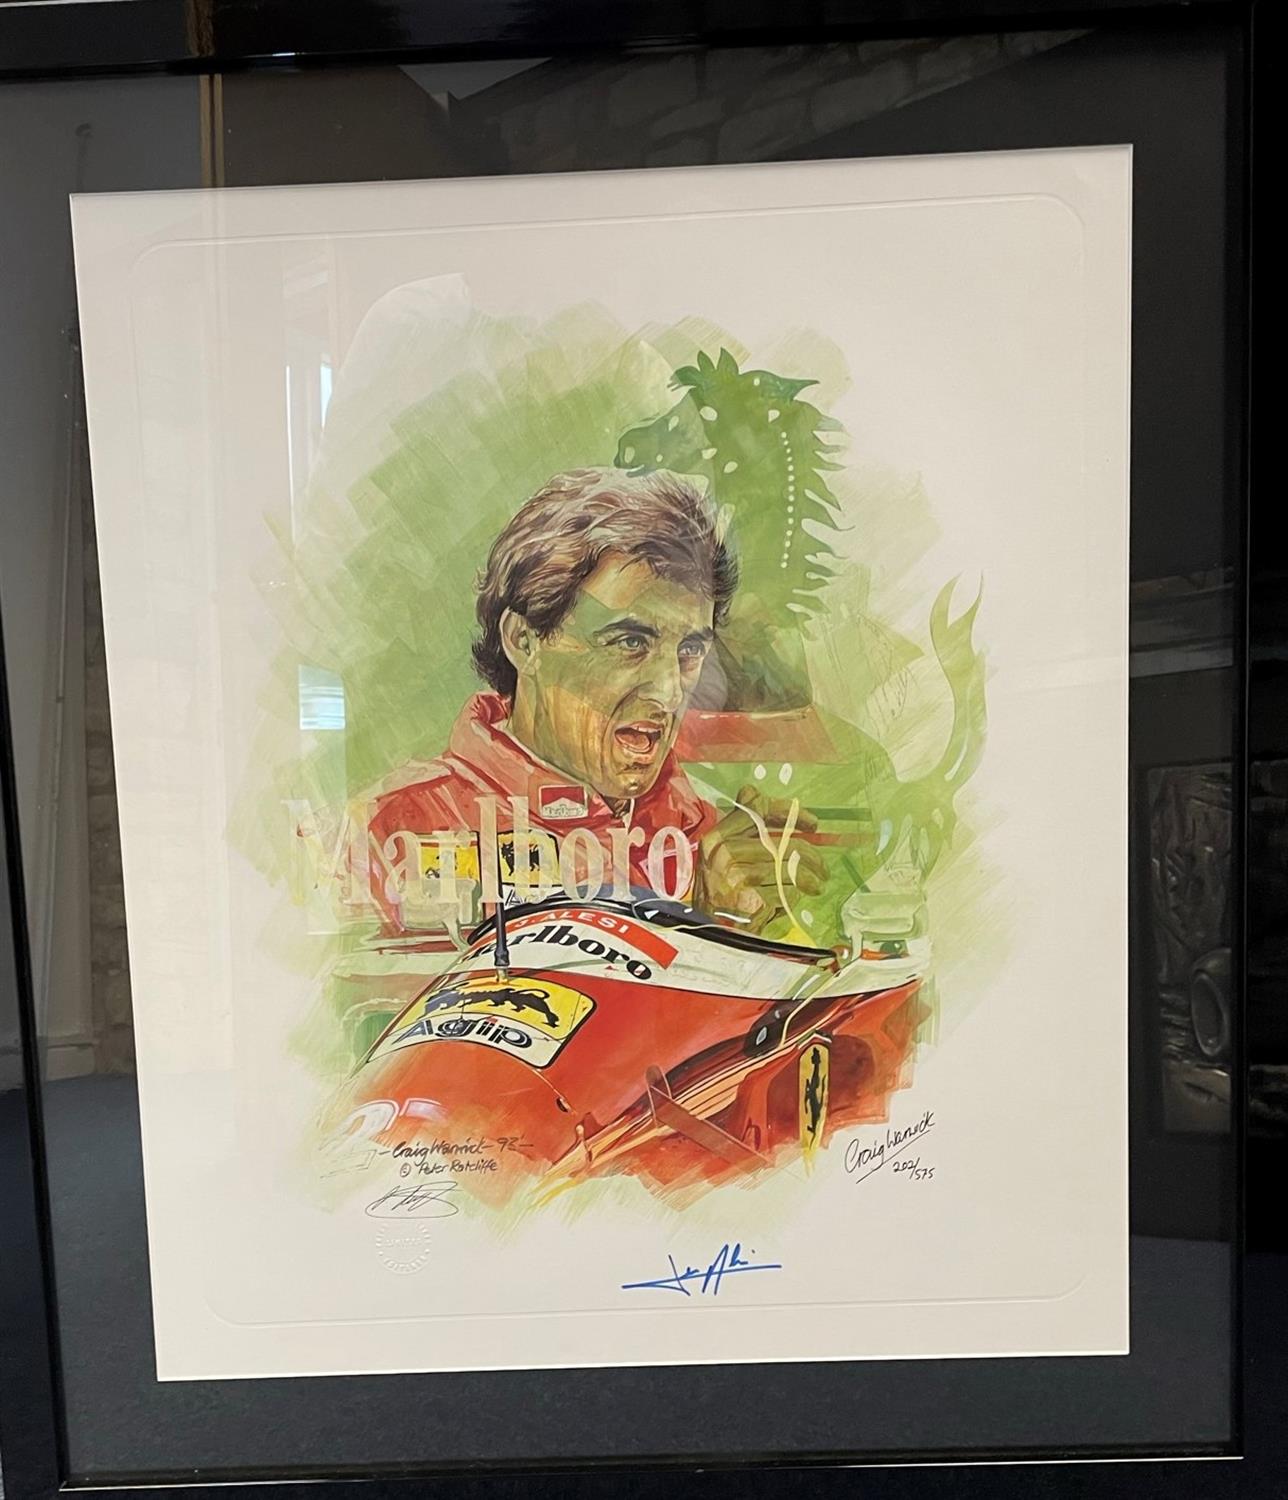 Jean Alesi Framed and Signed Collage Print by Craig Warwick - Image 4 of 6